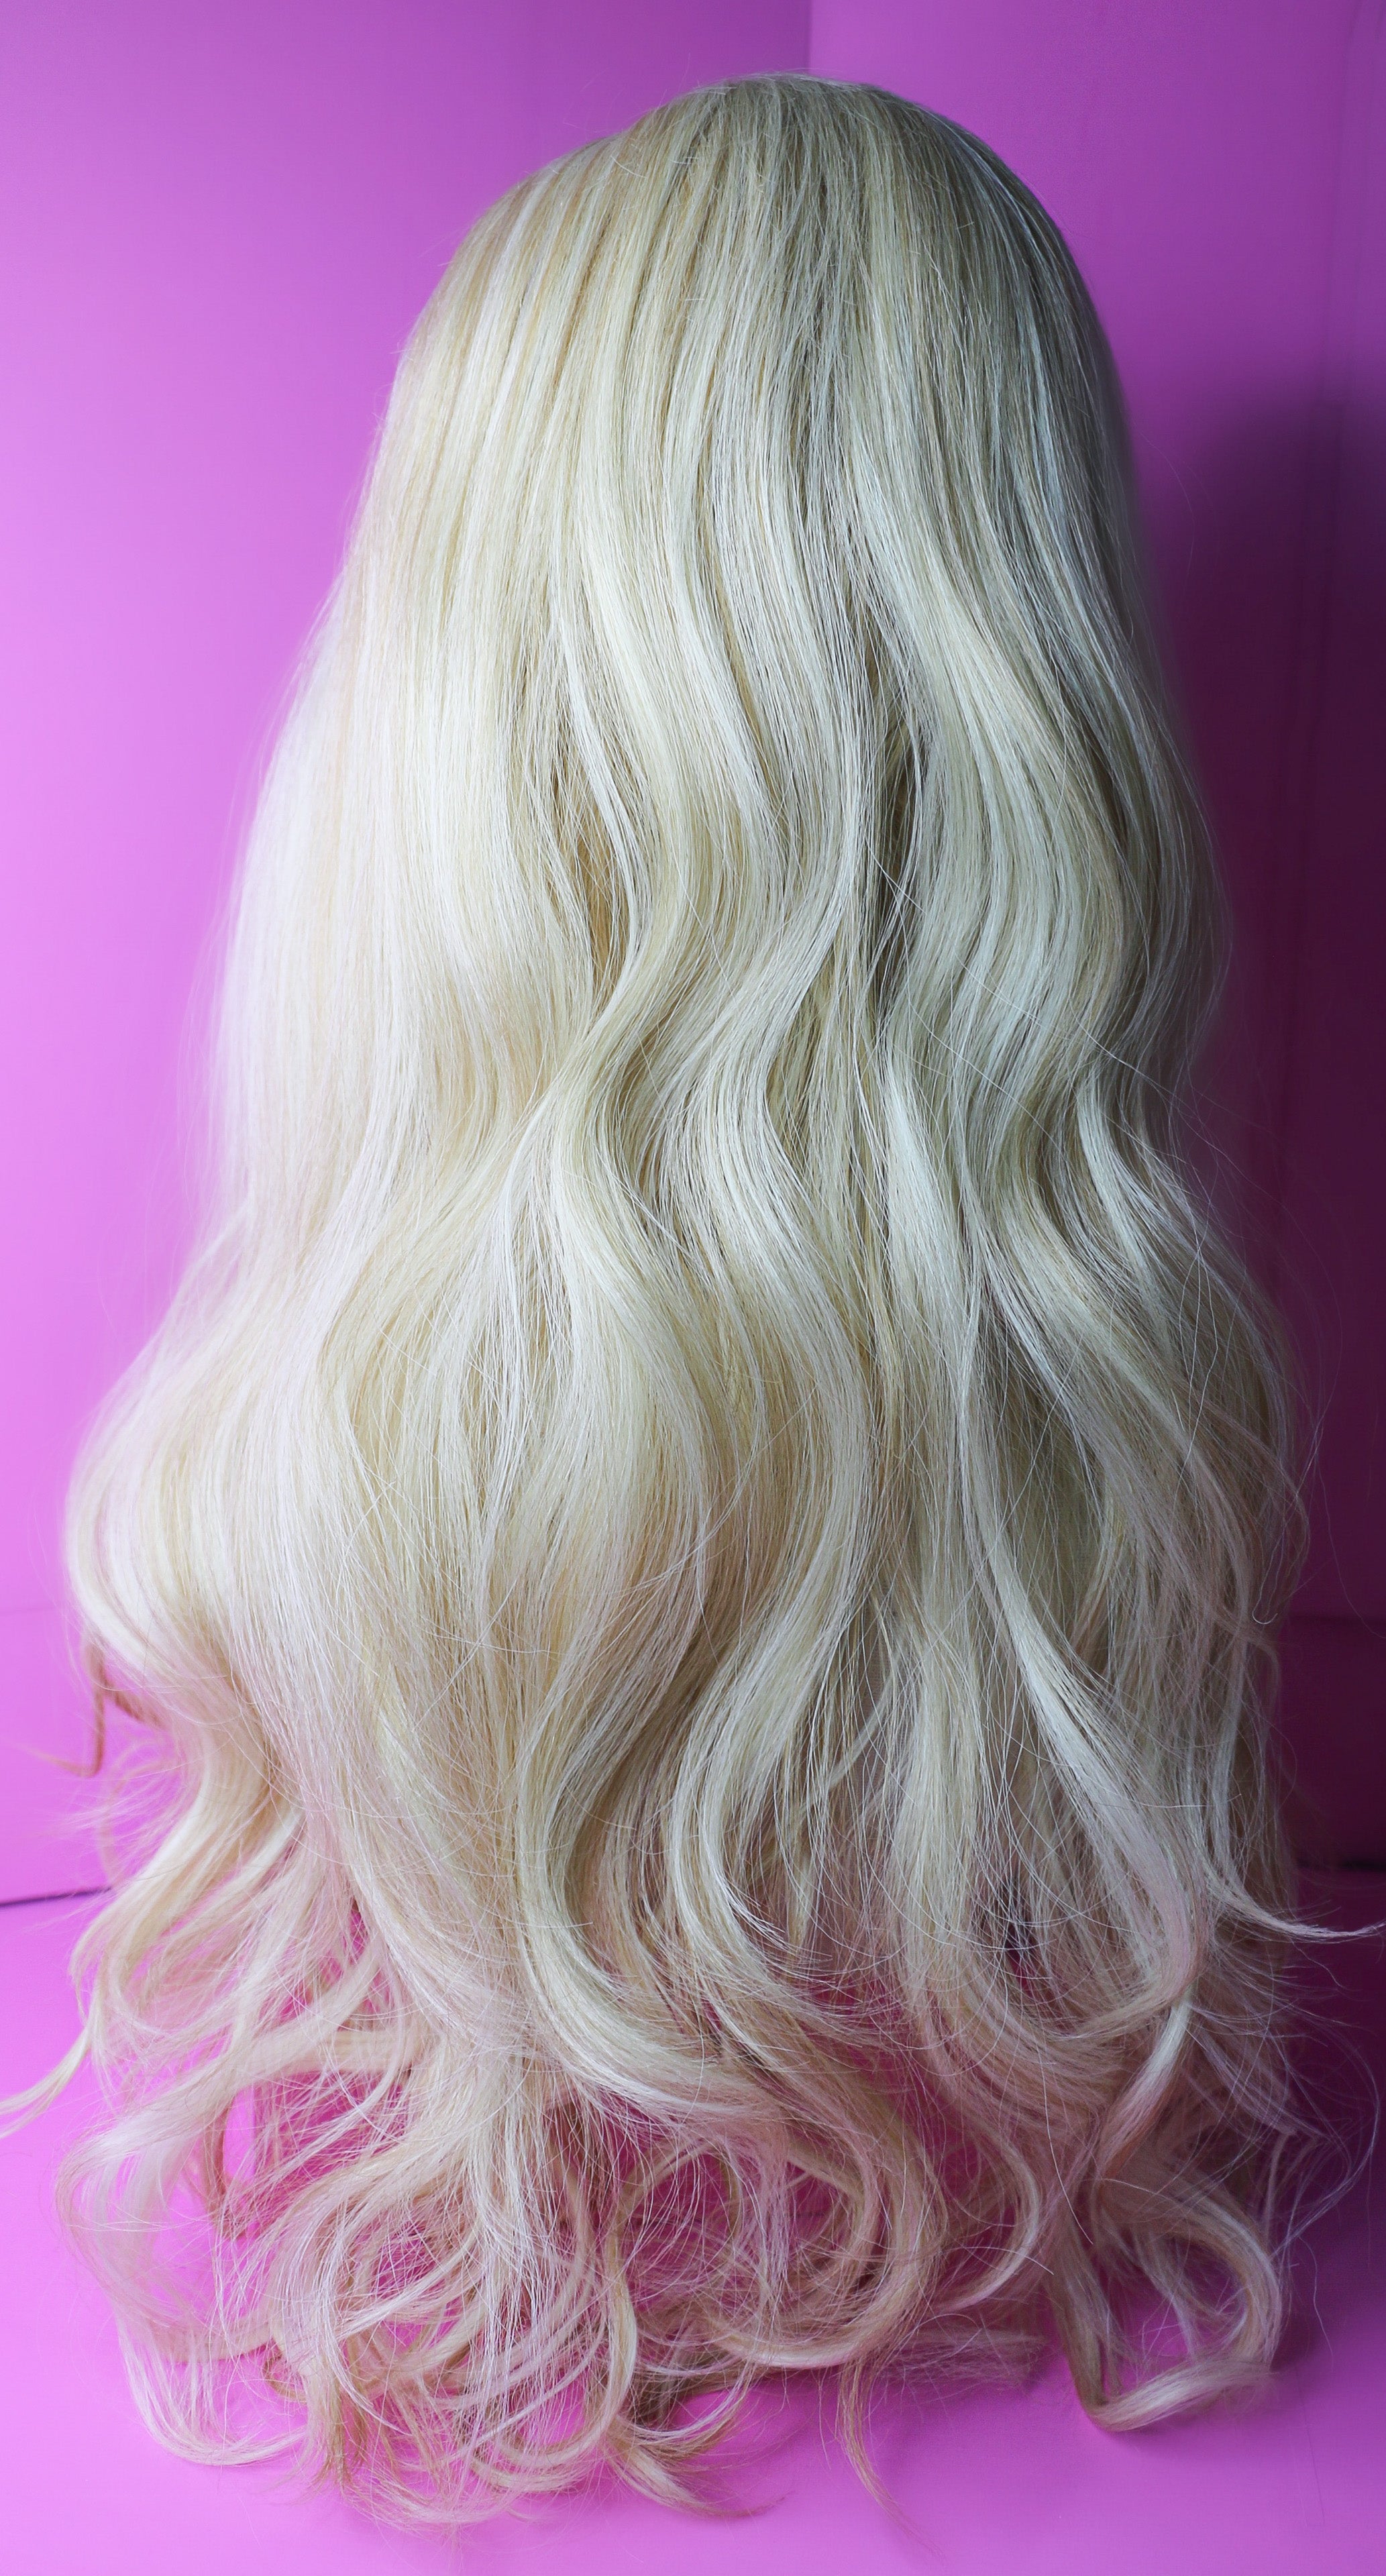 Blonde Bombshell - Lace Front Wig